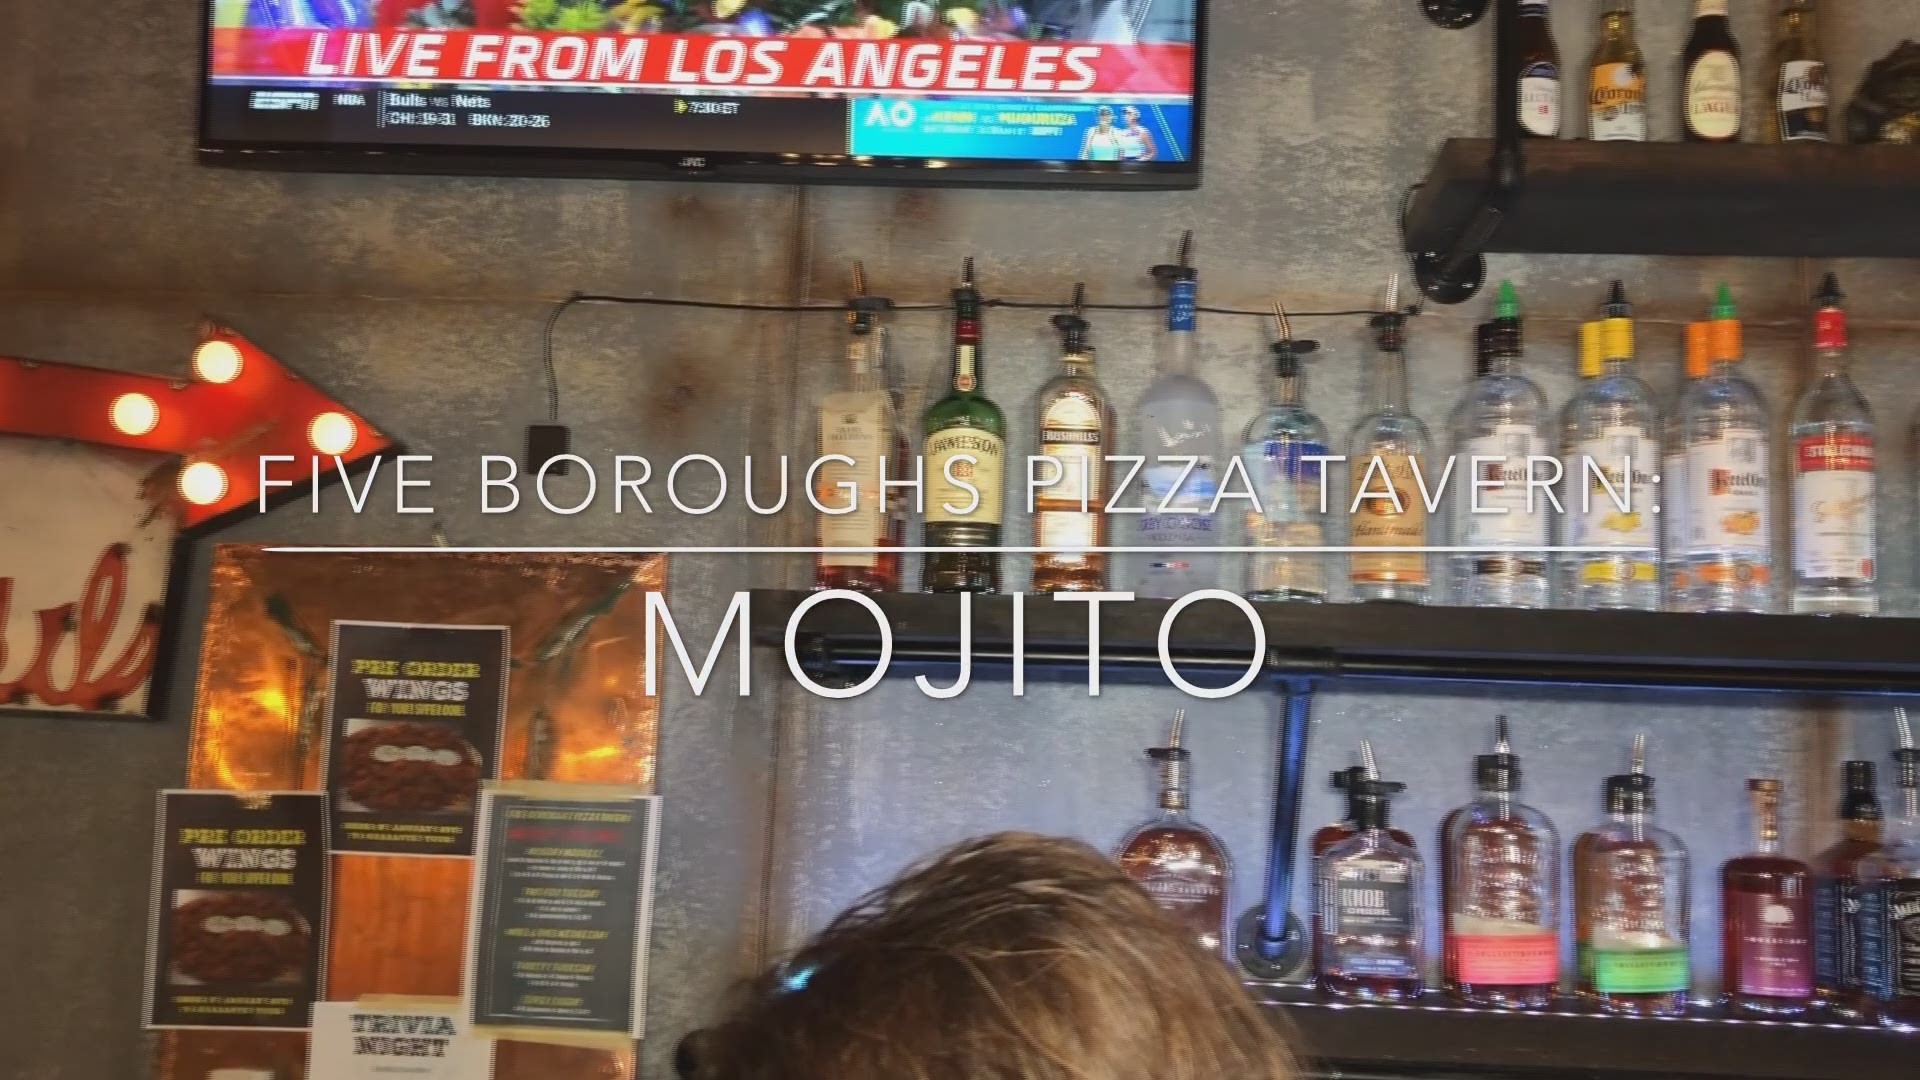 Video of the bar at Five Boroughs Pizza Tavern.